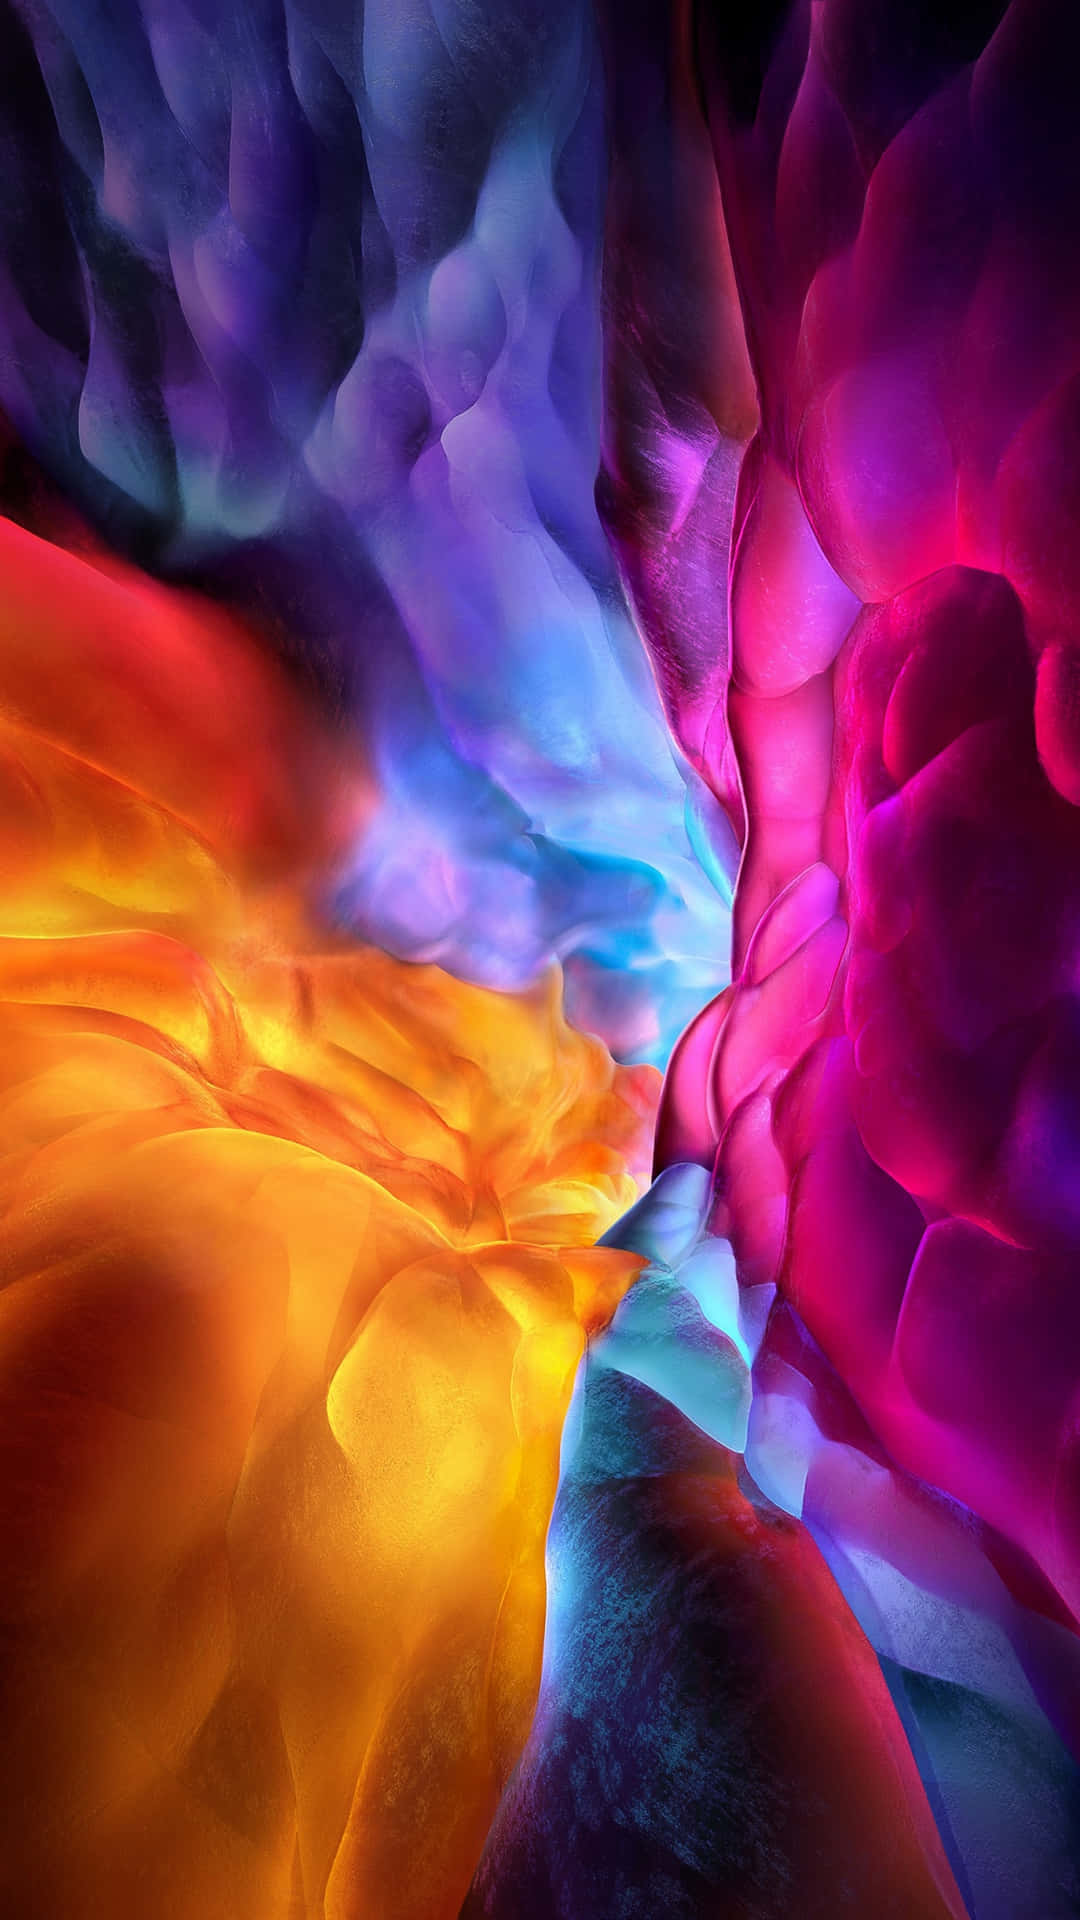 A Colorful Abstract Image Of A Colorful Flower Wallpaper